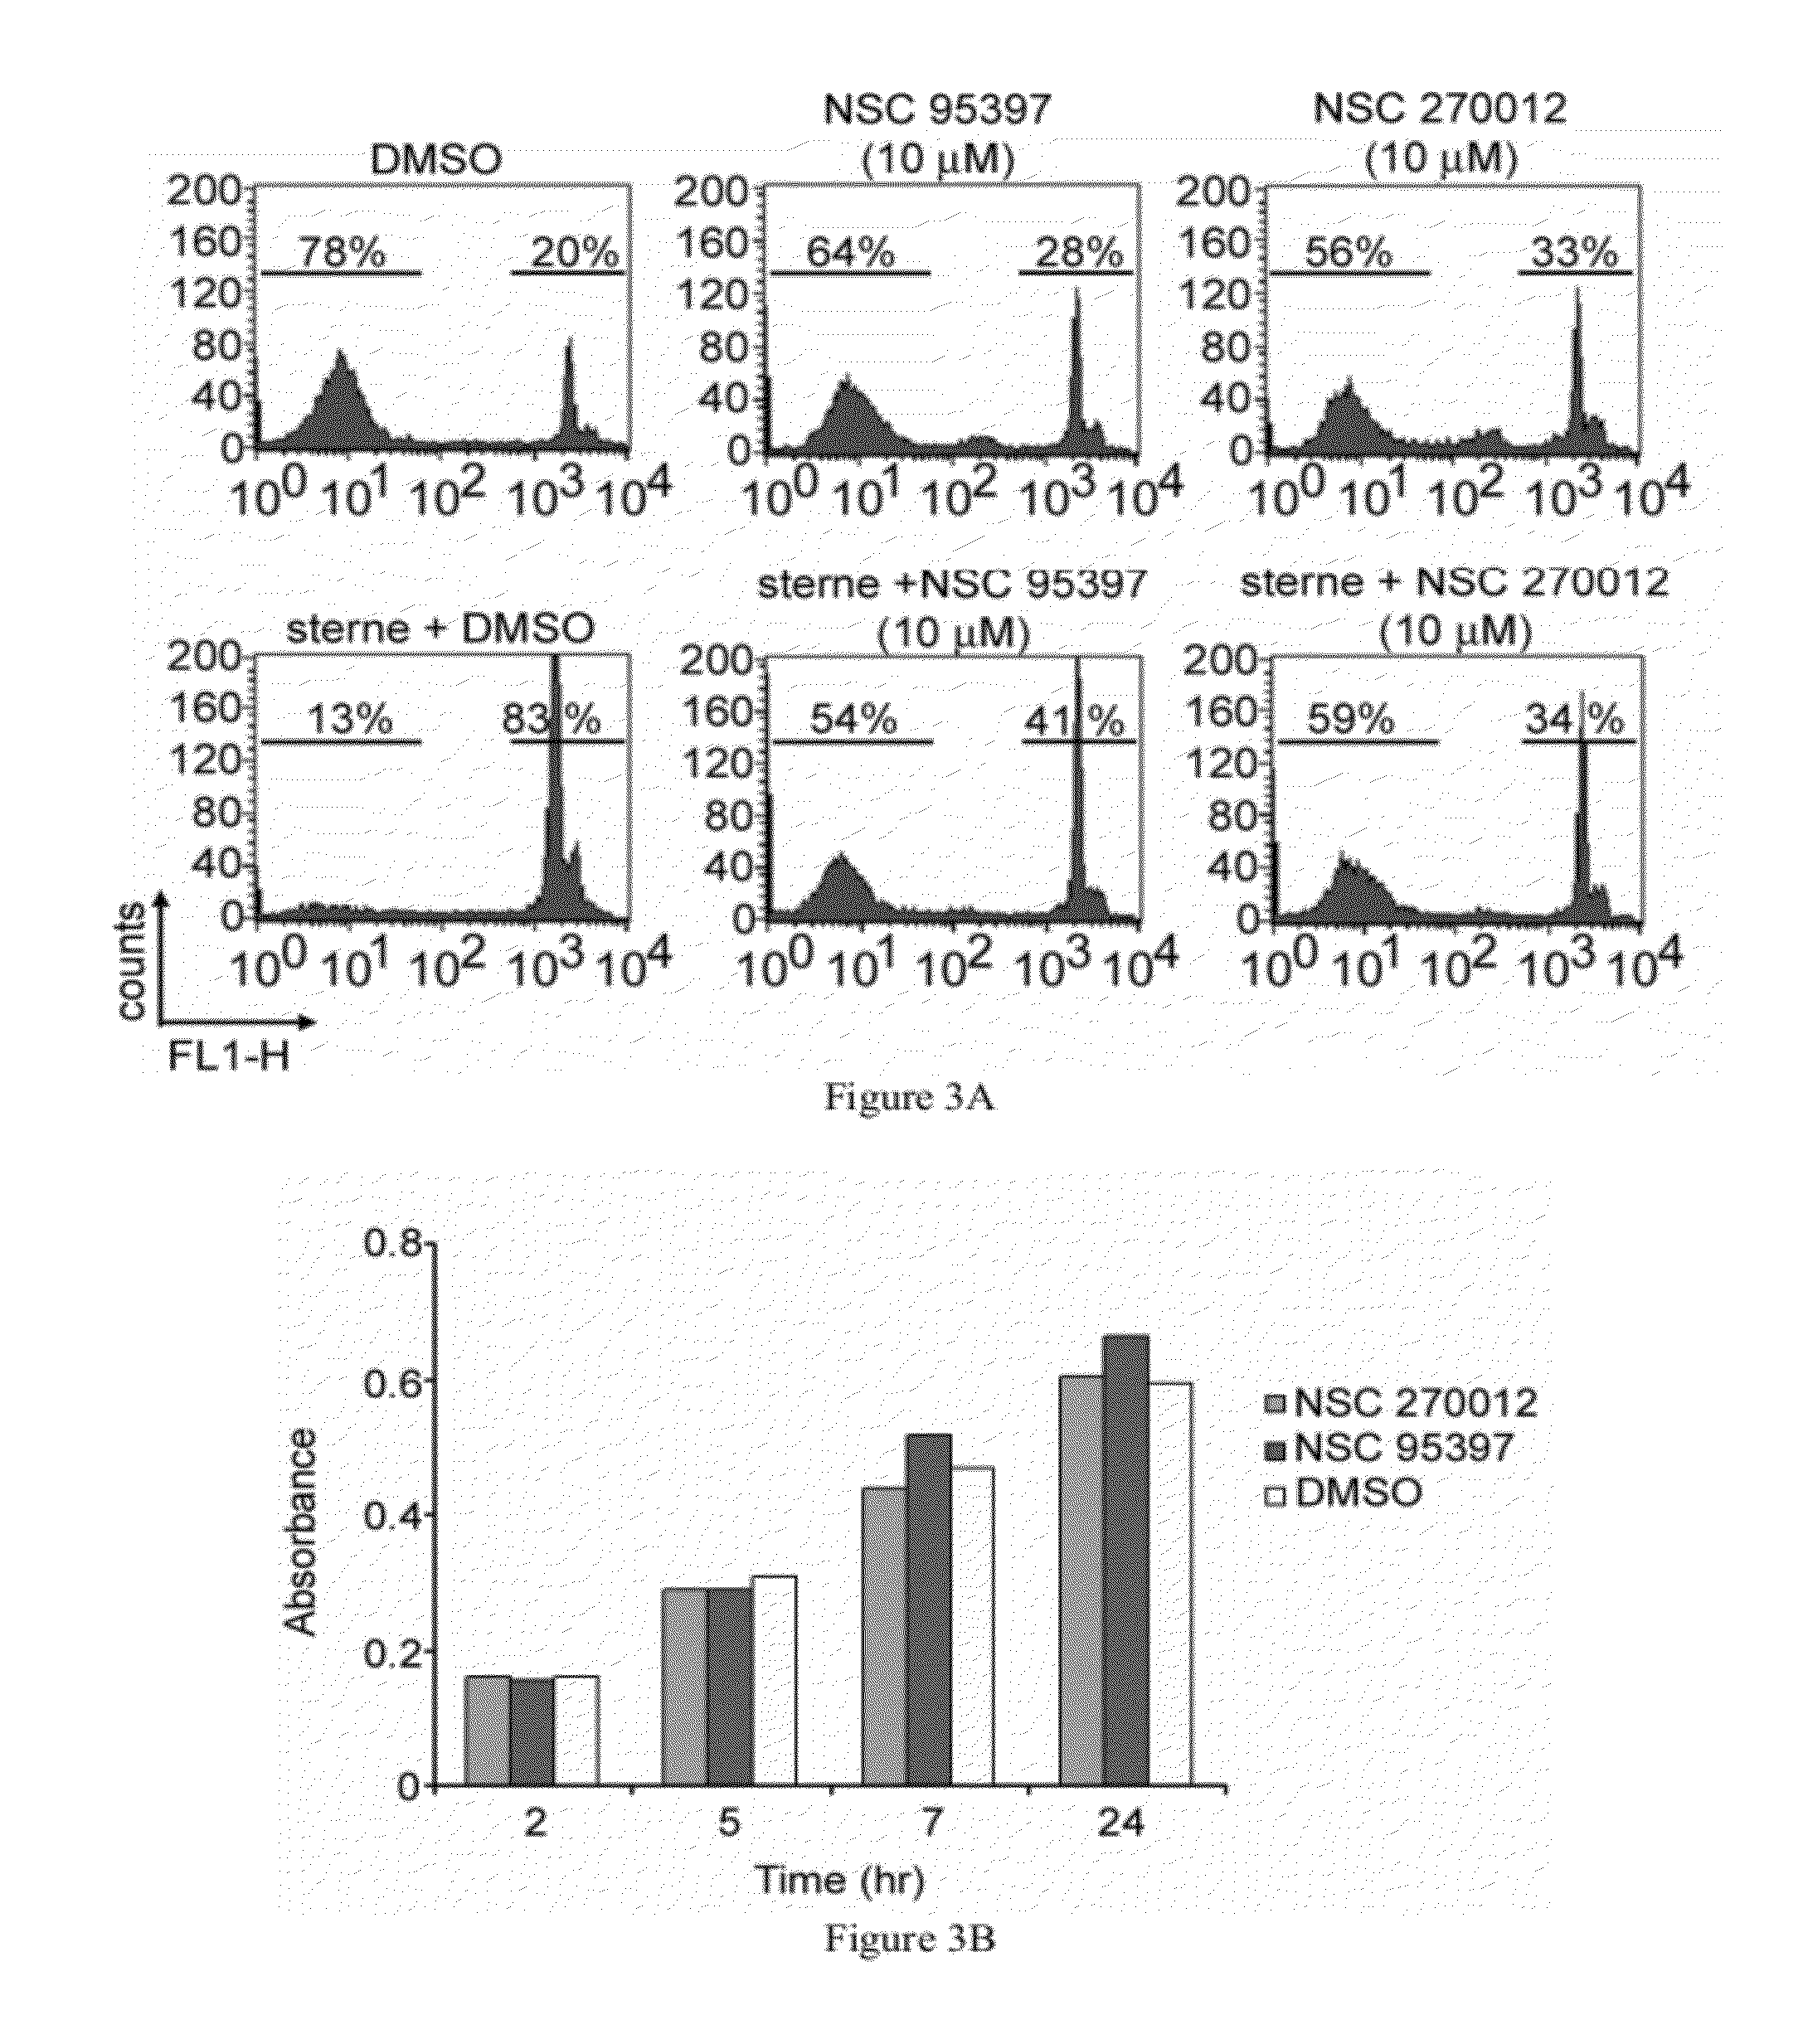 CD45 and Methods and Compounds Related Thereto